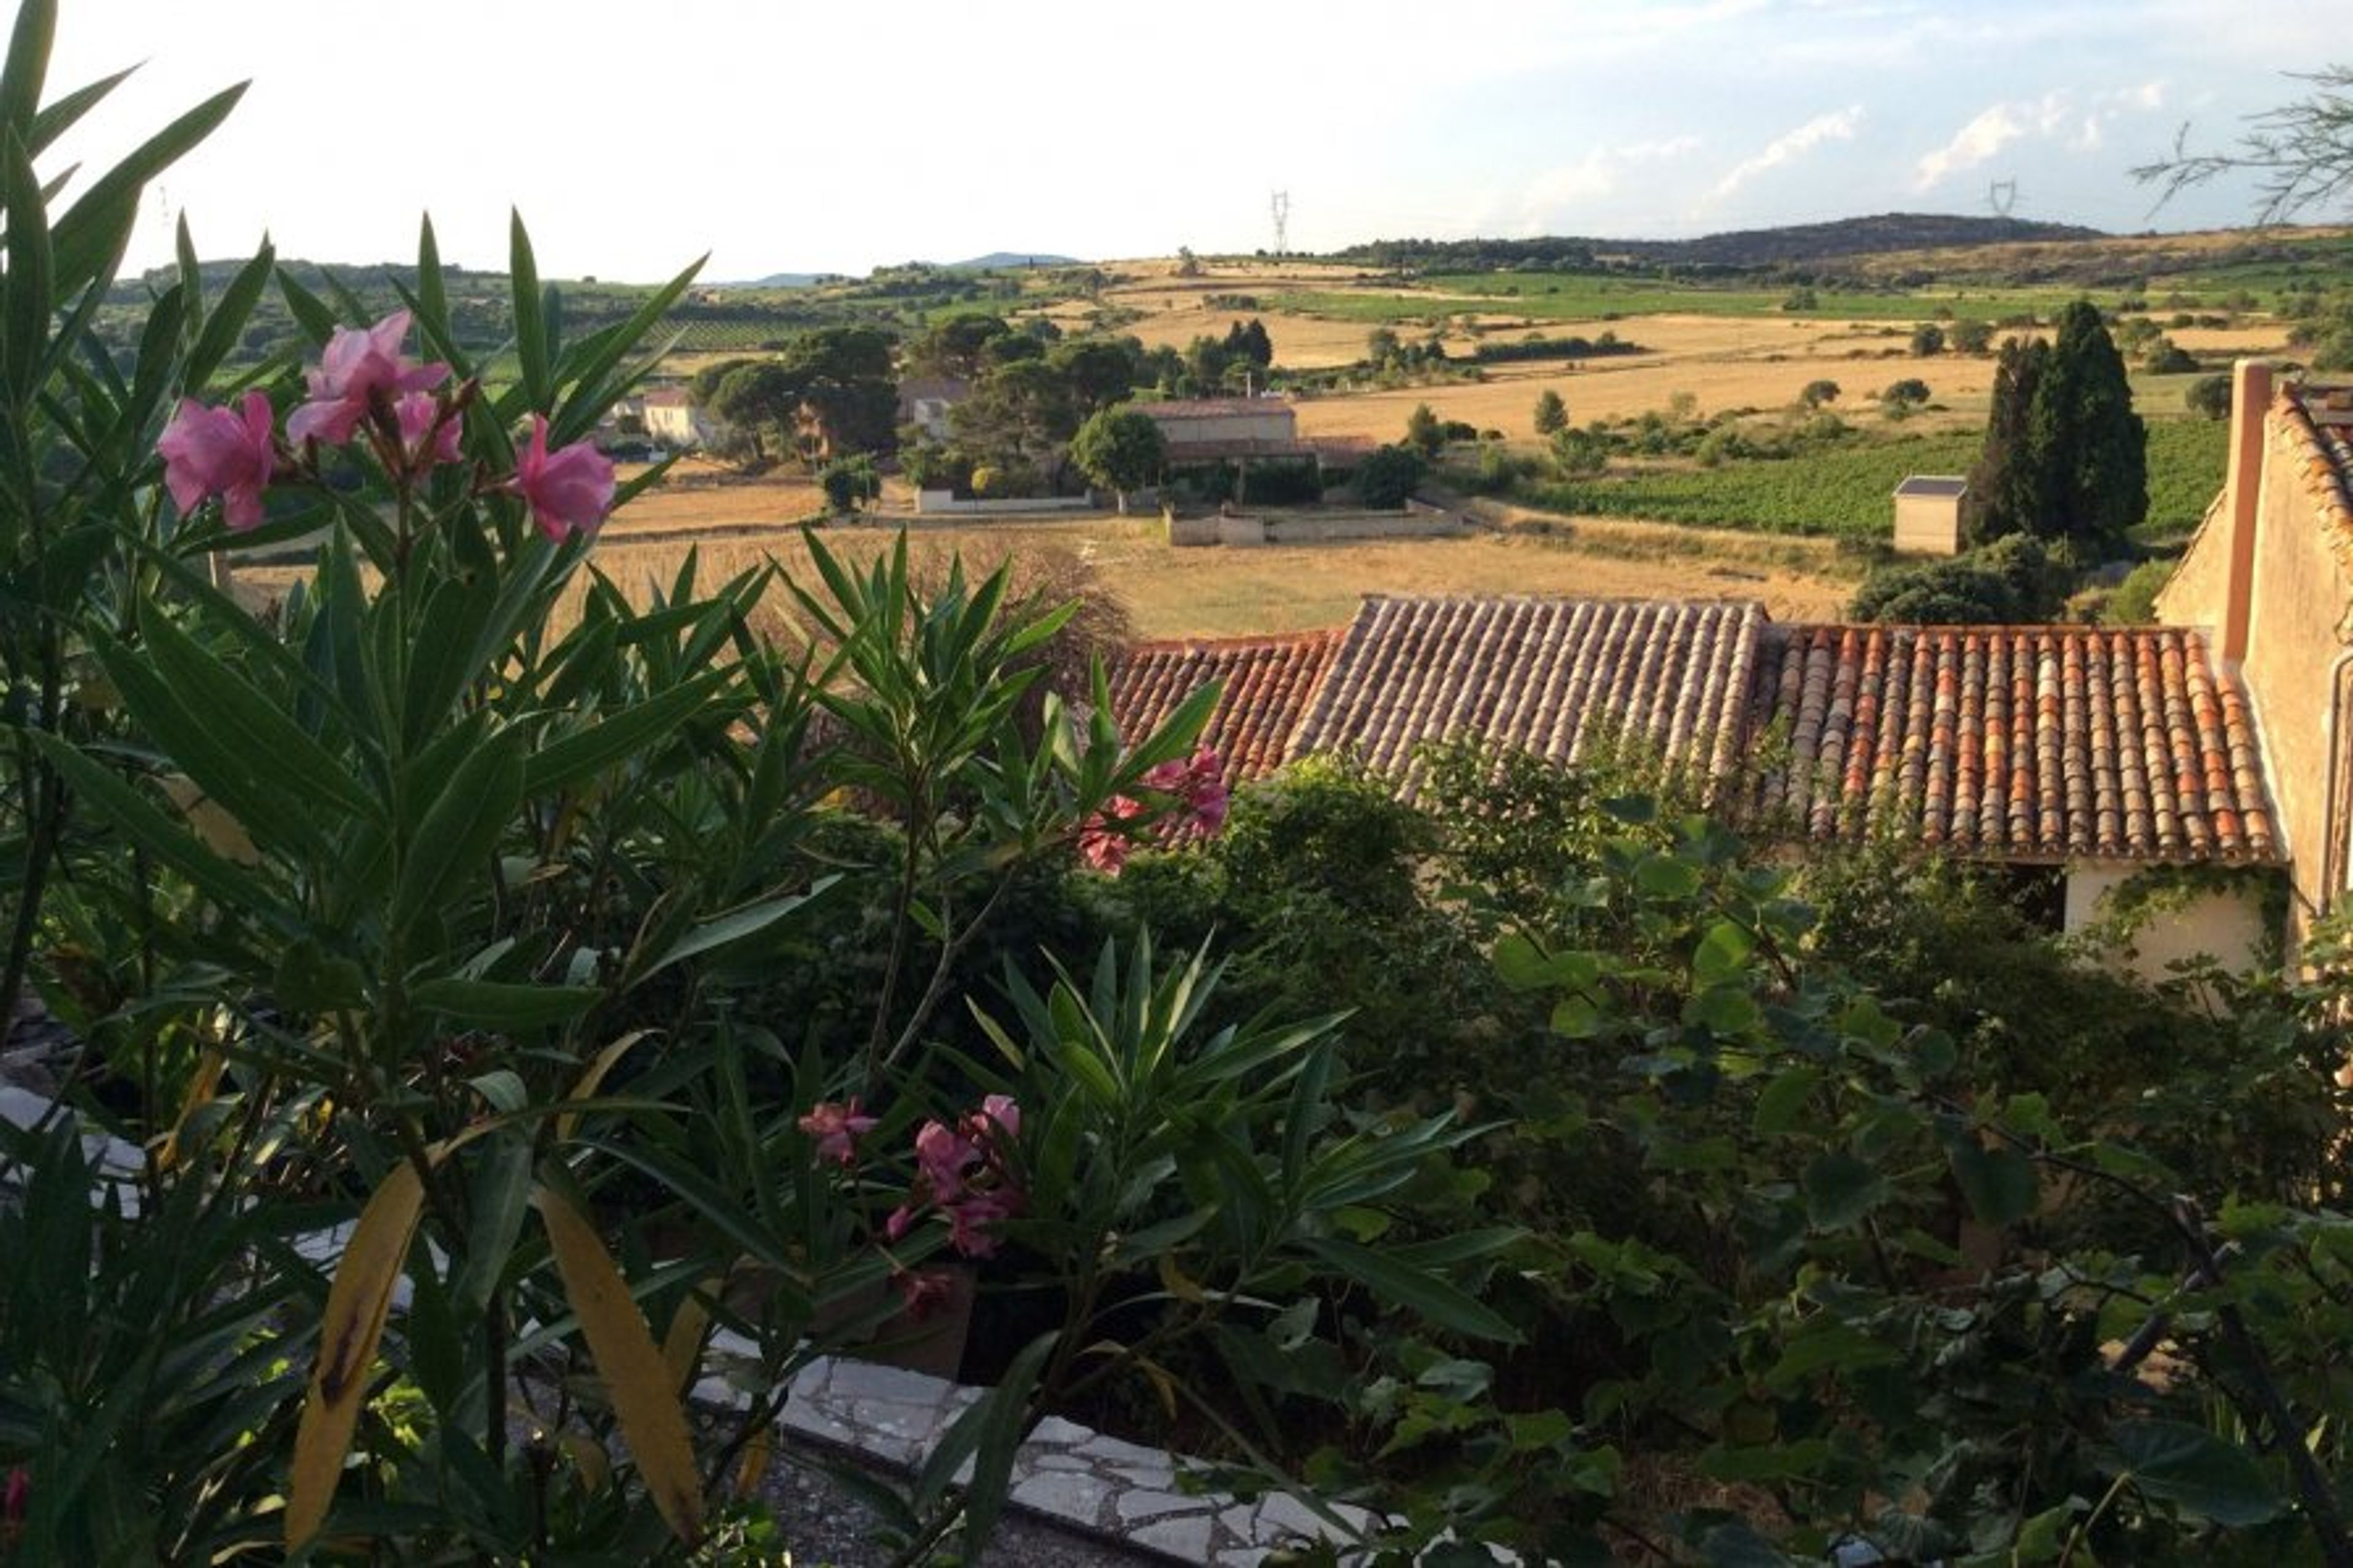 View from dining area on terrace over rooftops, vineyards and rye.